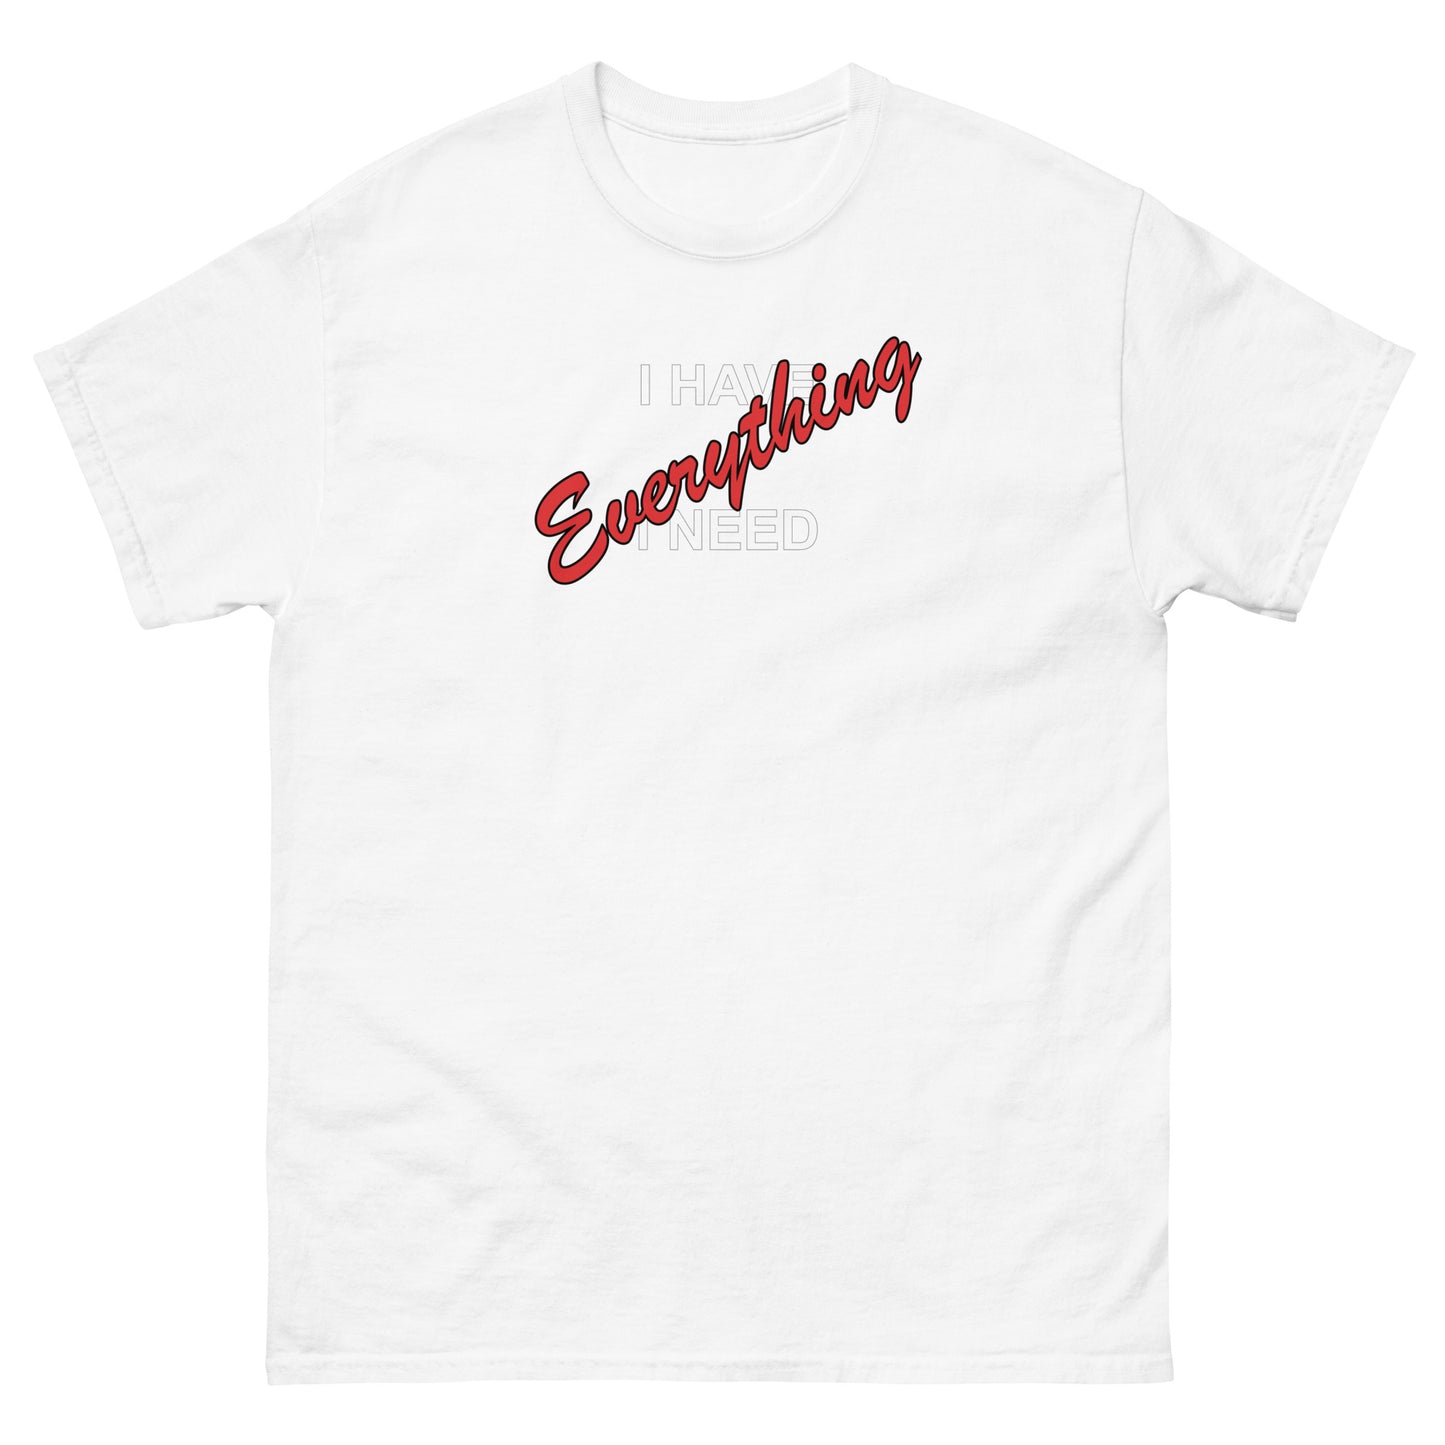 I HAVE EVERYTHING I NEED (white outlined letters) - Unisex